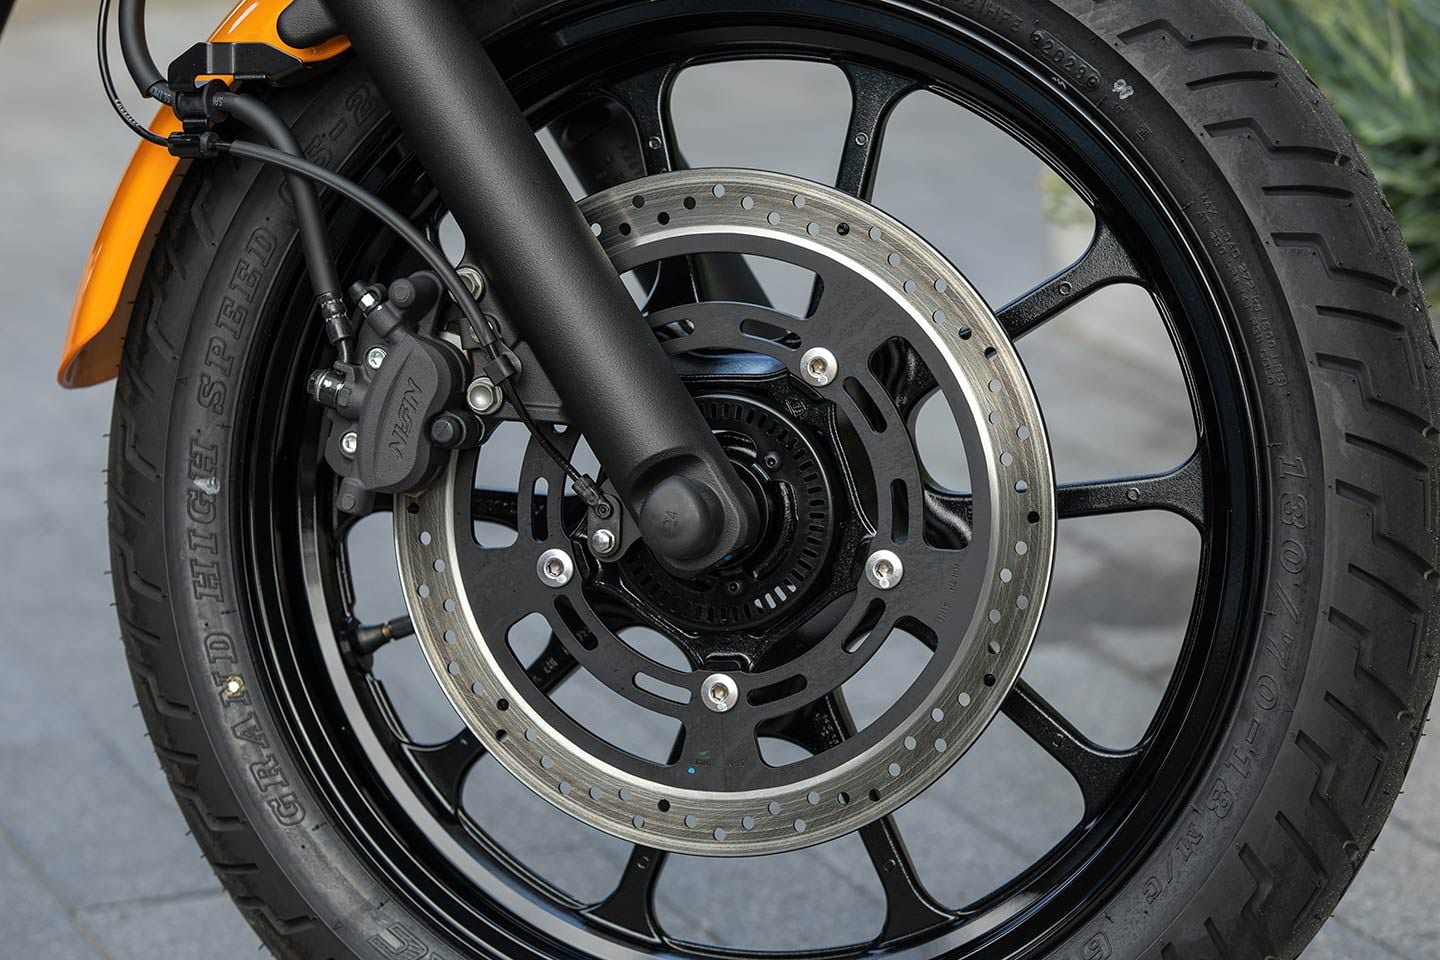 A single 310mm disc and dual-piston caliper handles braking on the front end. The 2024 Kawasaki Eliminator is available with or without ABS in Pearl Robotic White and Pearl Storm Gray.